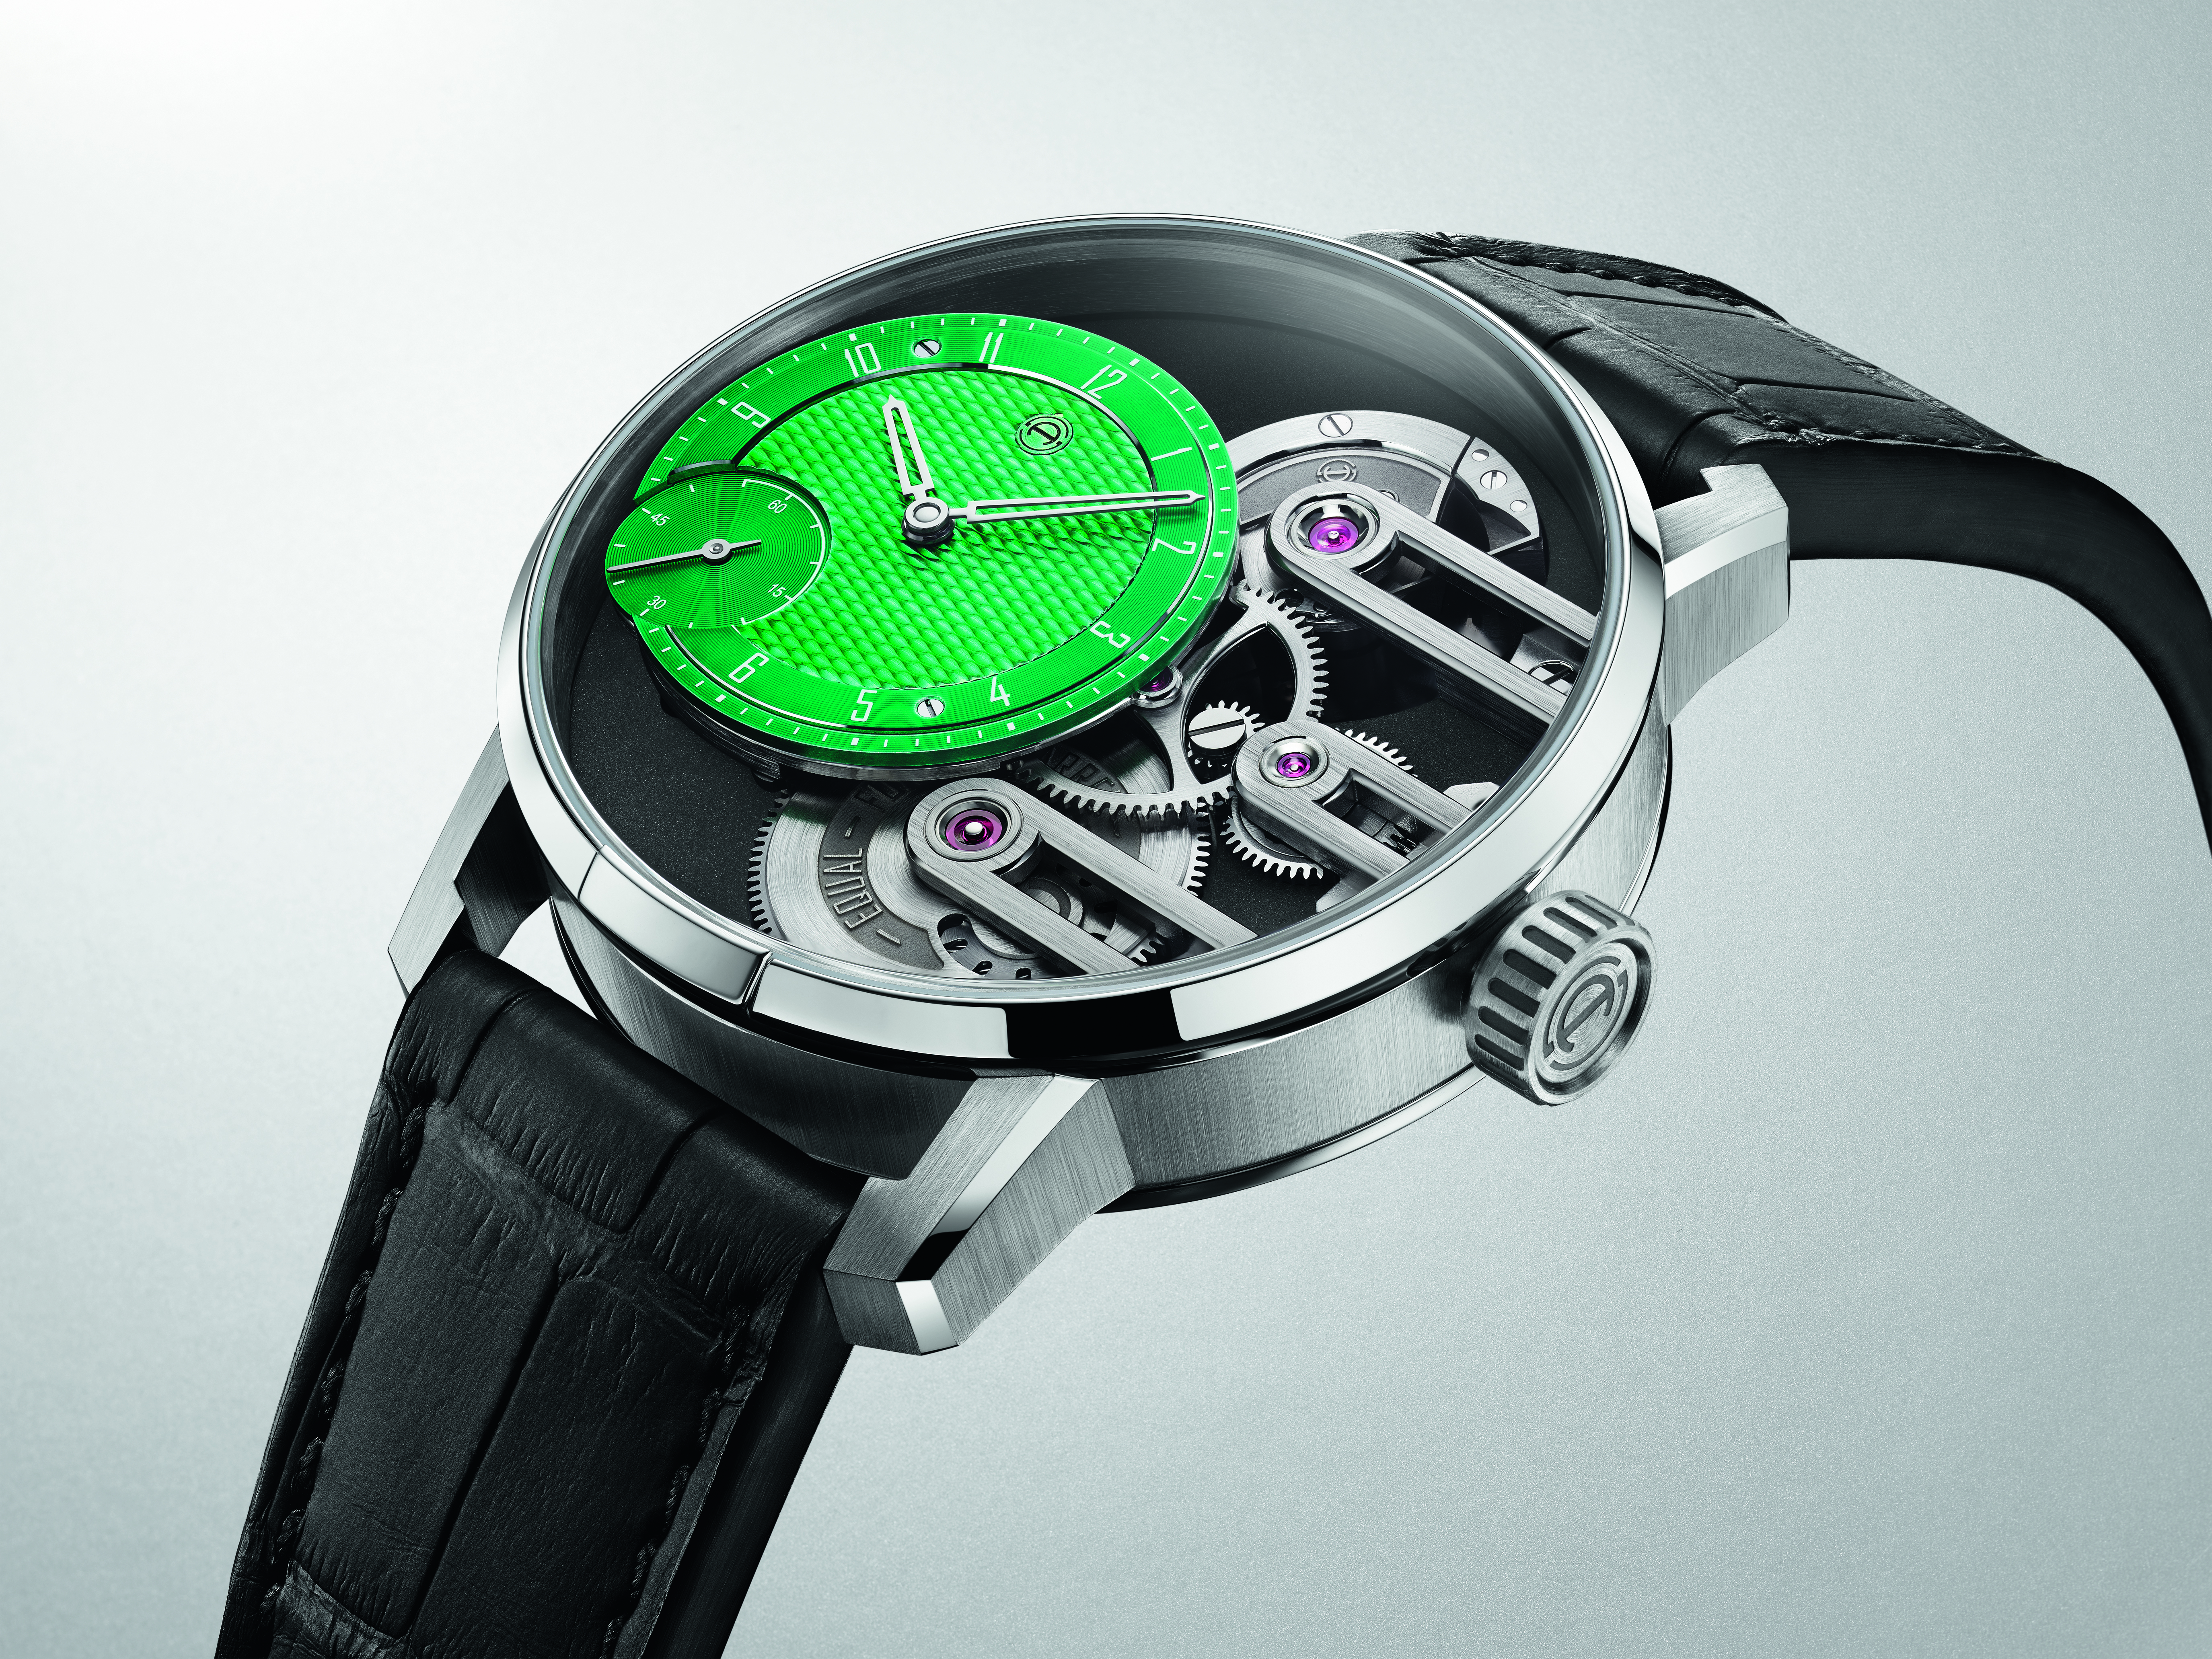 The Armin Strom Gravity Equal Force Jungle Green: Exotic color meets avant-garde watchmaking